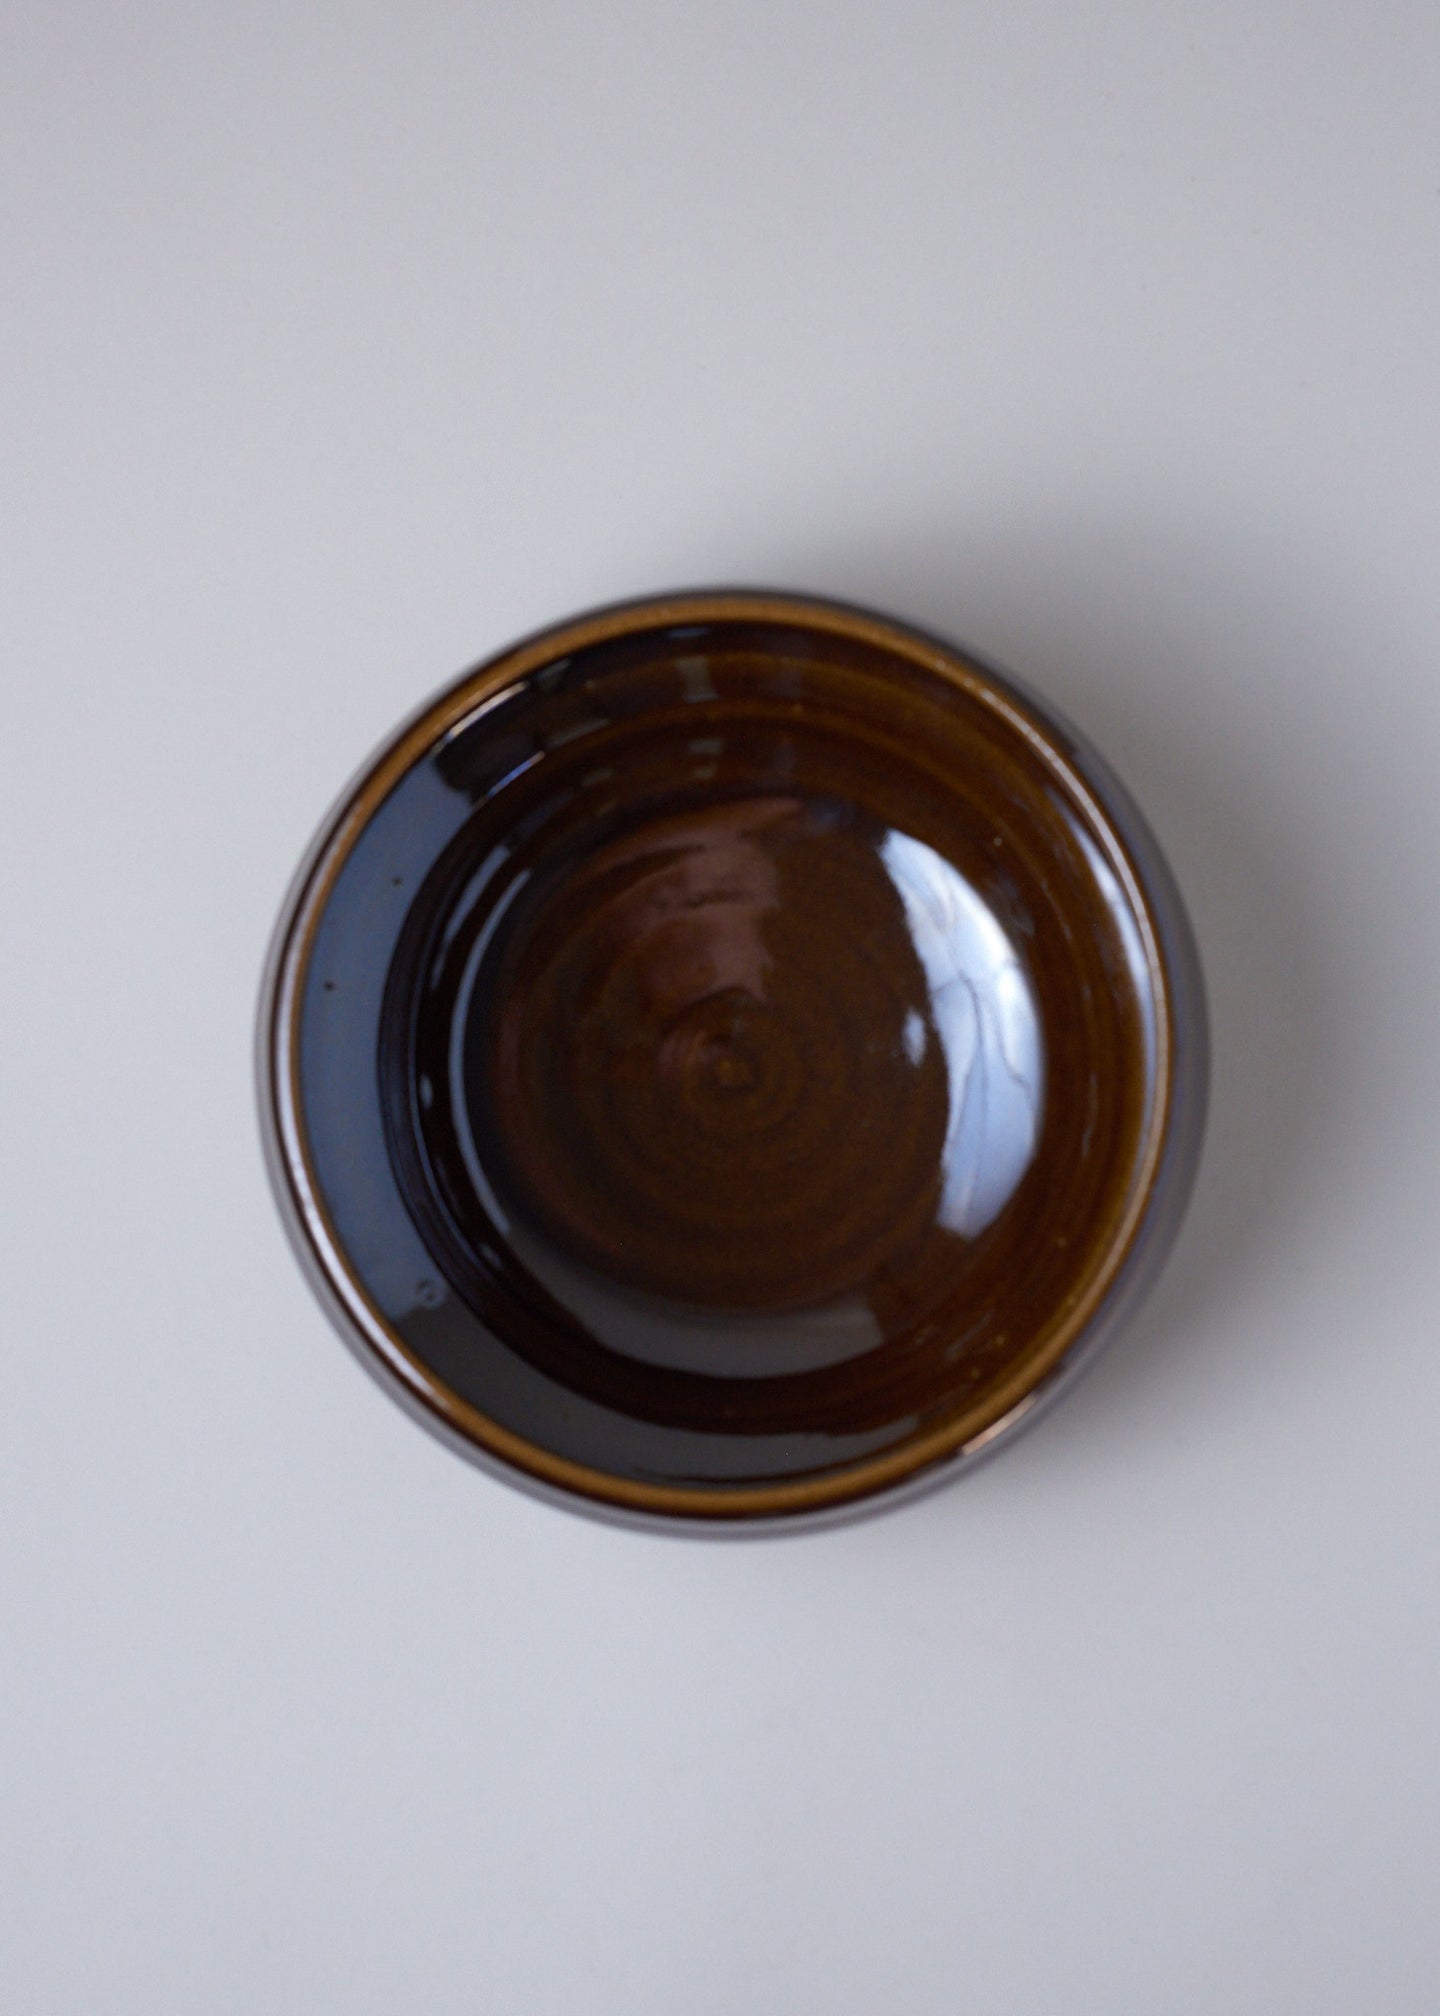 Catchall in Dark Amber - Victoria Morris Pottery